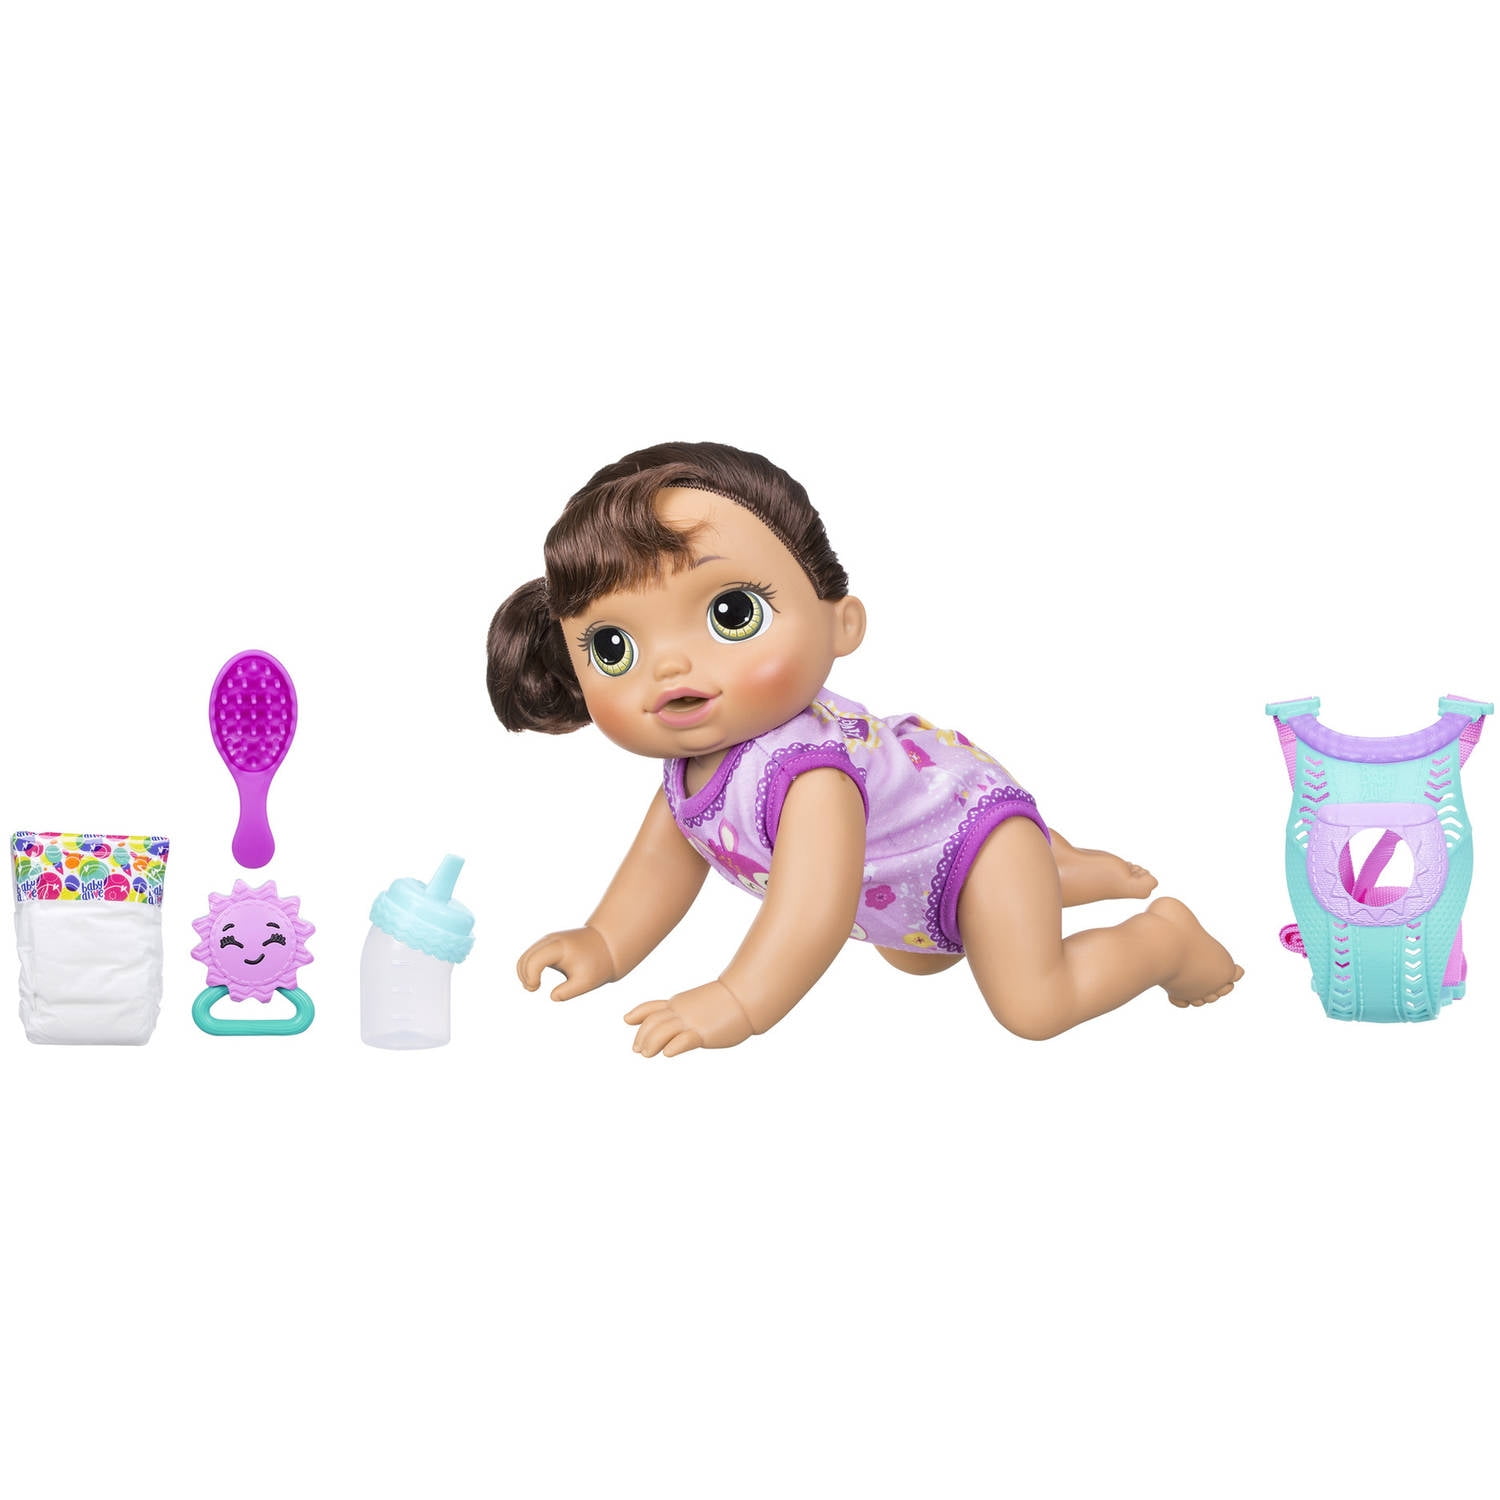 Phrases and Sounds 30 Crawls New Details about   Baby Alive Baby Go Bye Bye Black Hair 